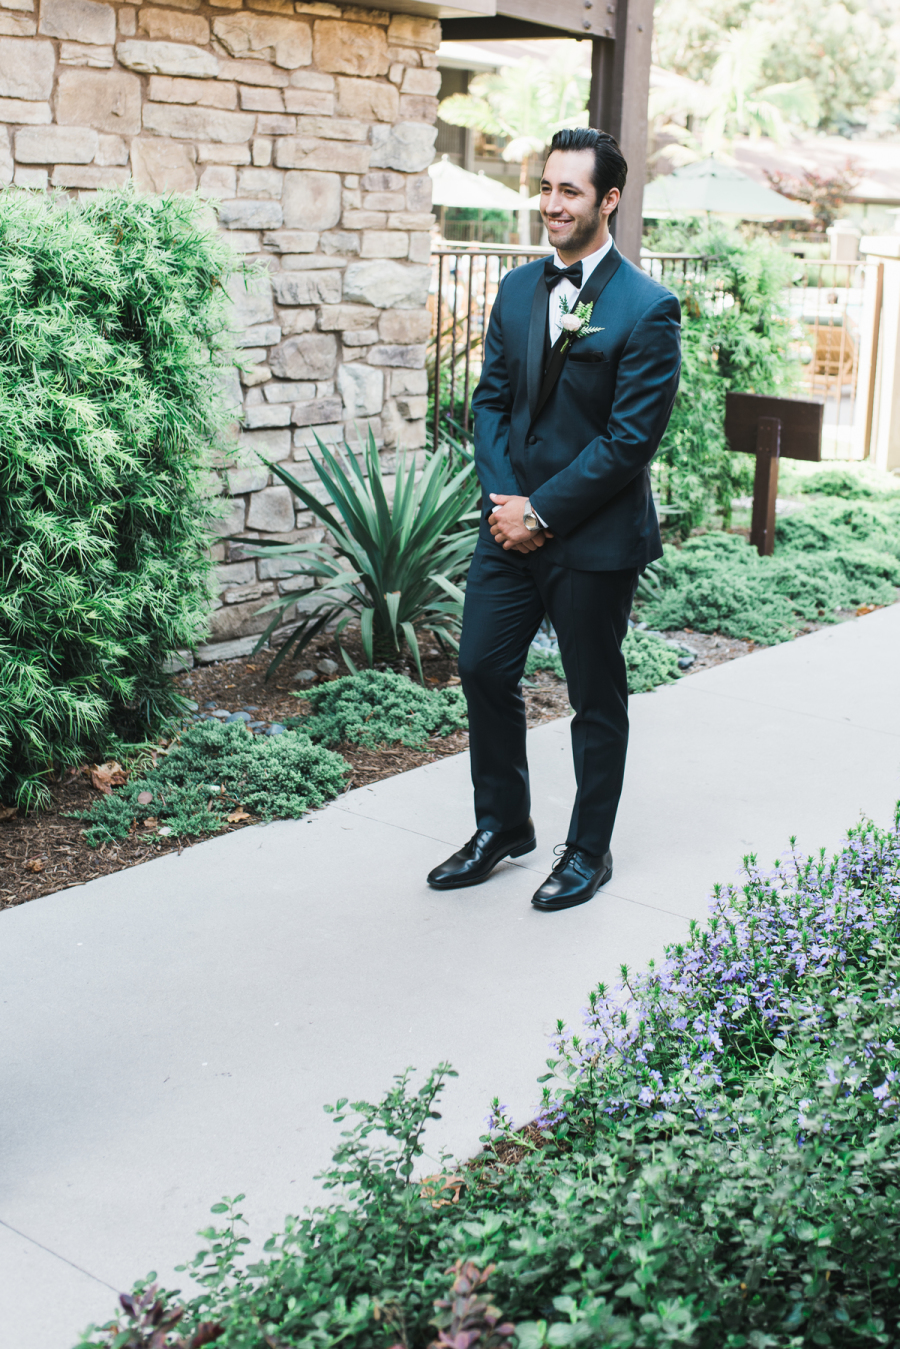 The groom was wearign a navy suit with black lapels and a bow tie